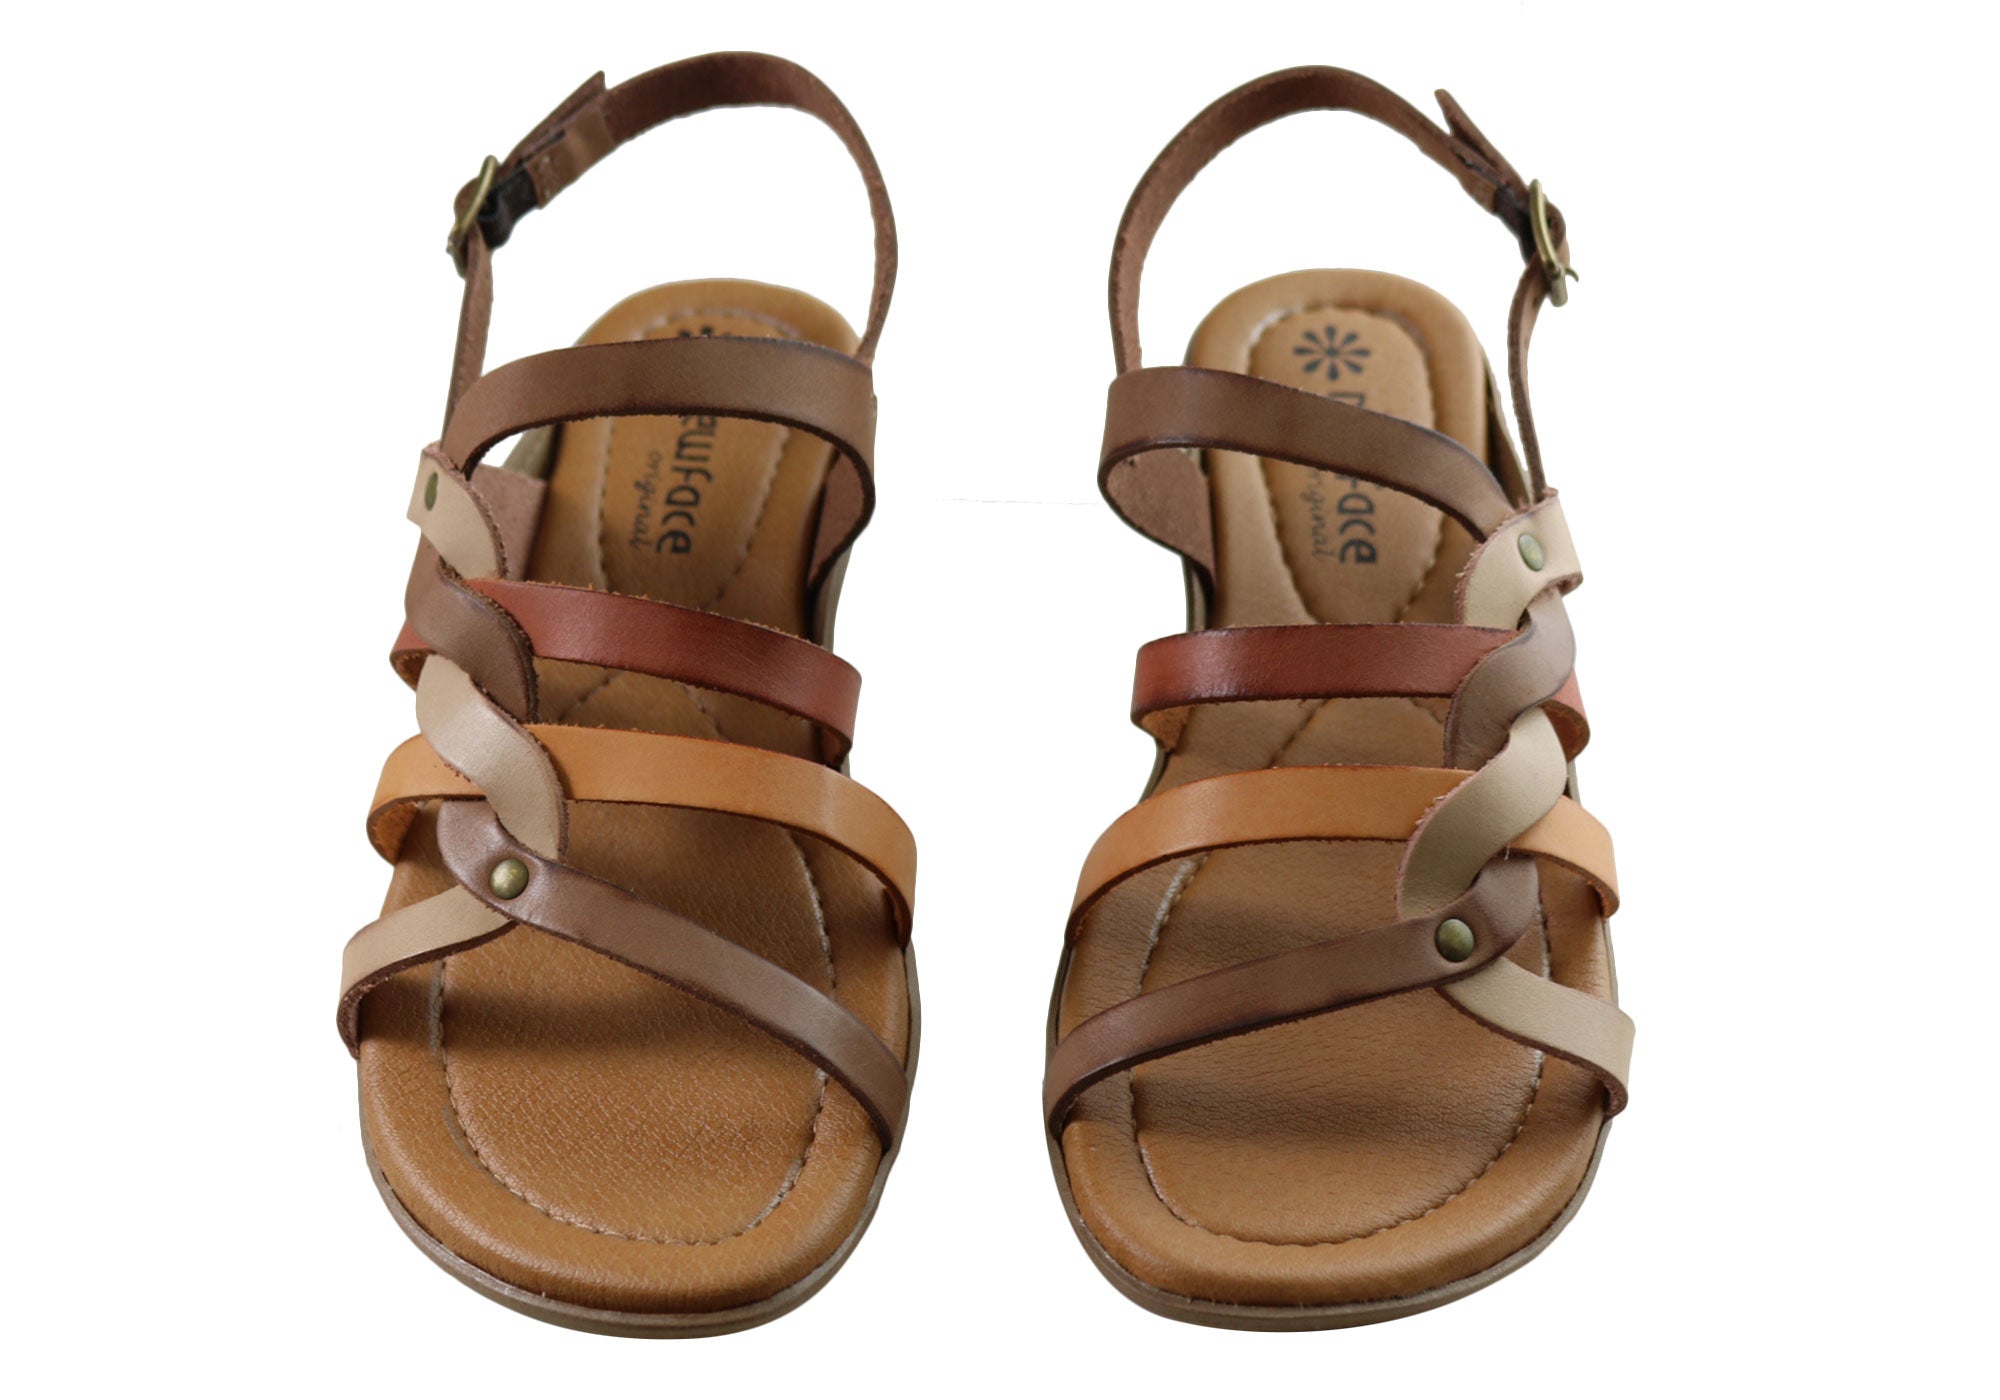 new face sandals